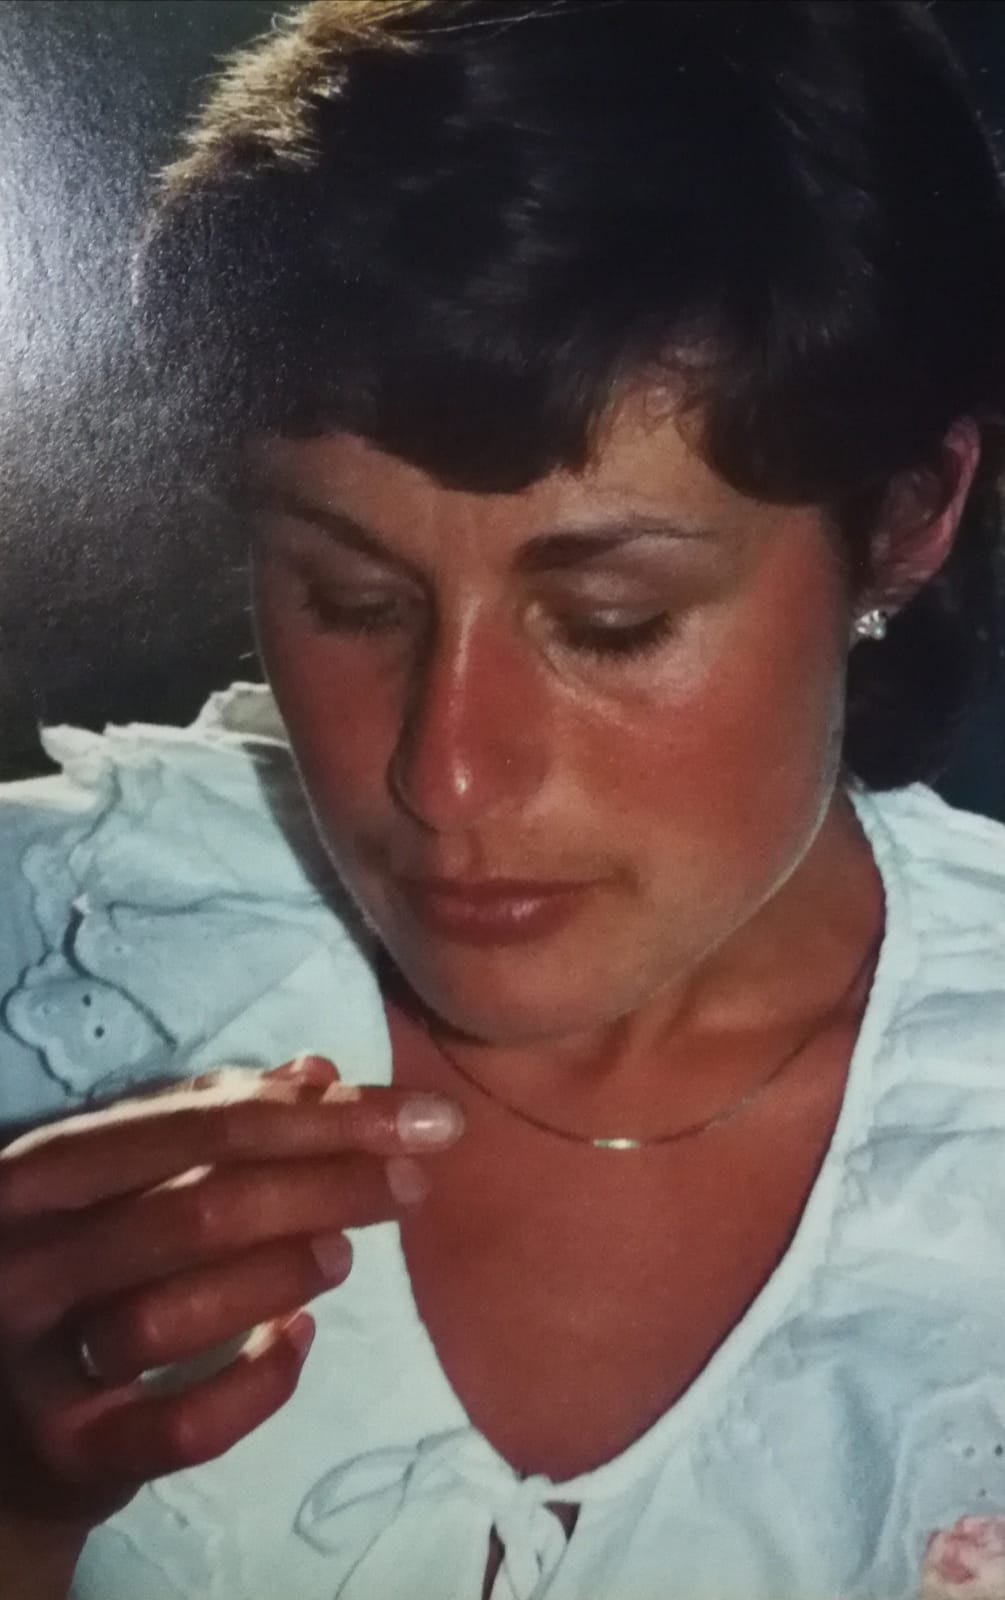 What My Mum Taught Me The Week She Died